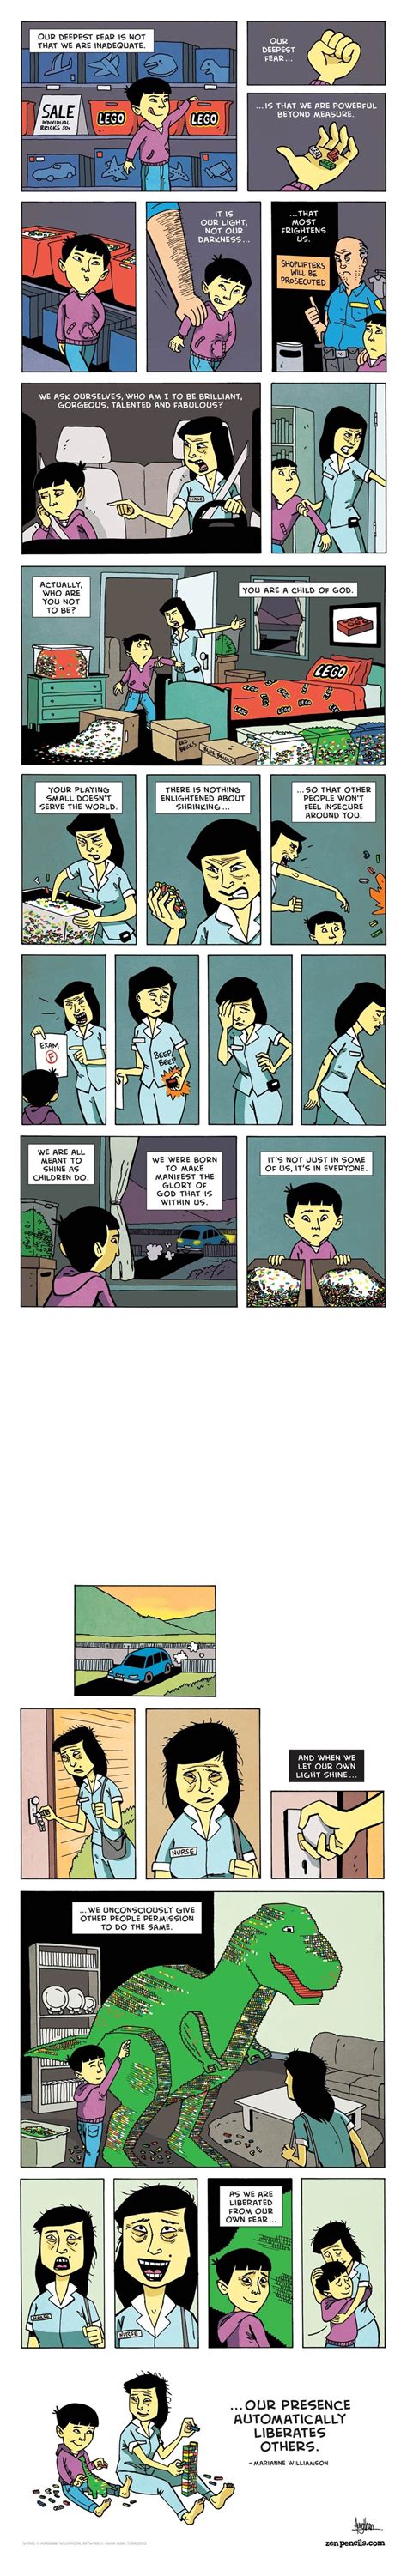 zen pencils best cartoons and various comics translated into english most funny comic strips